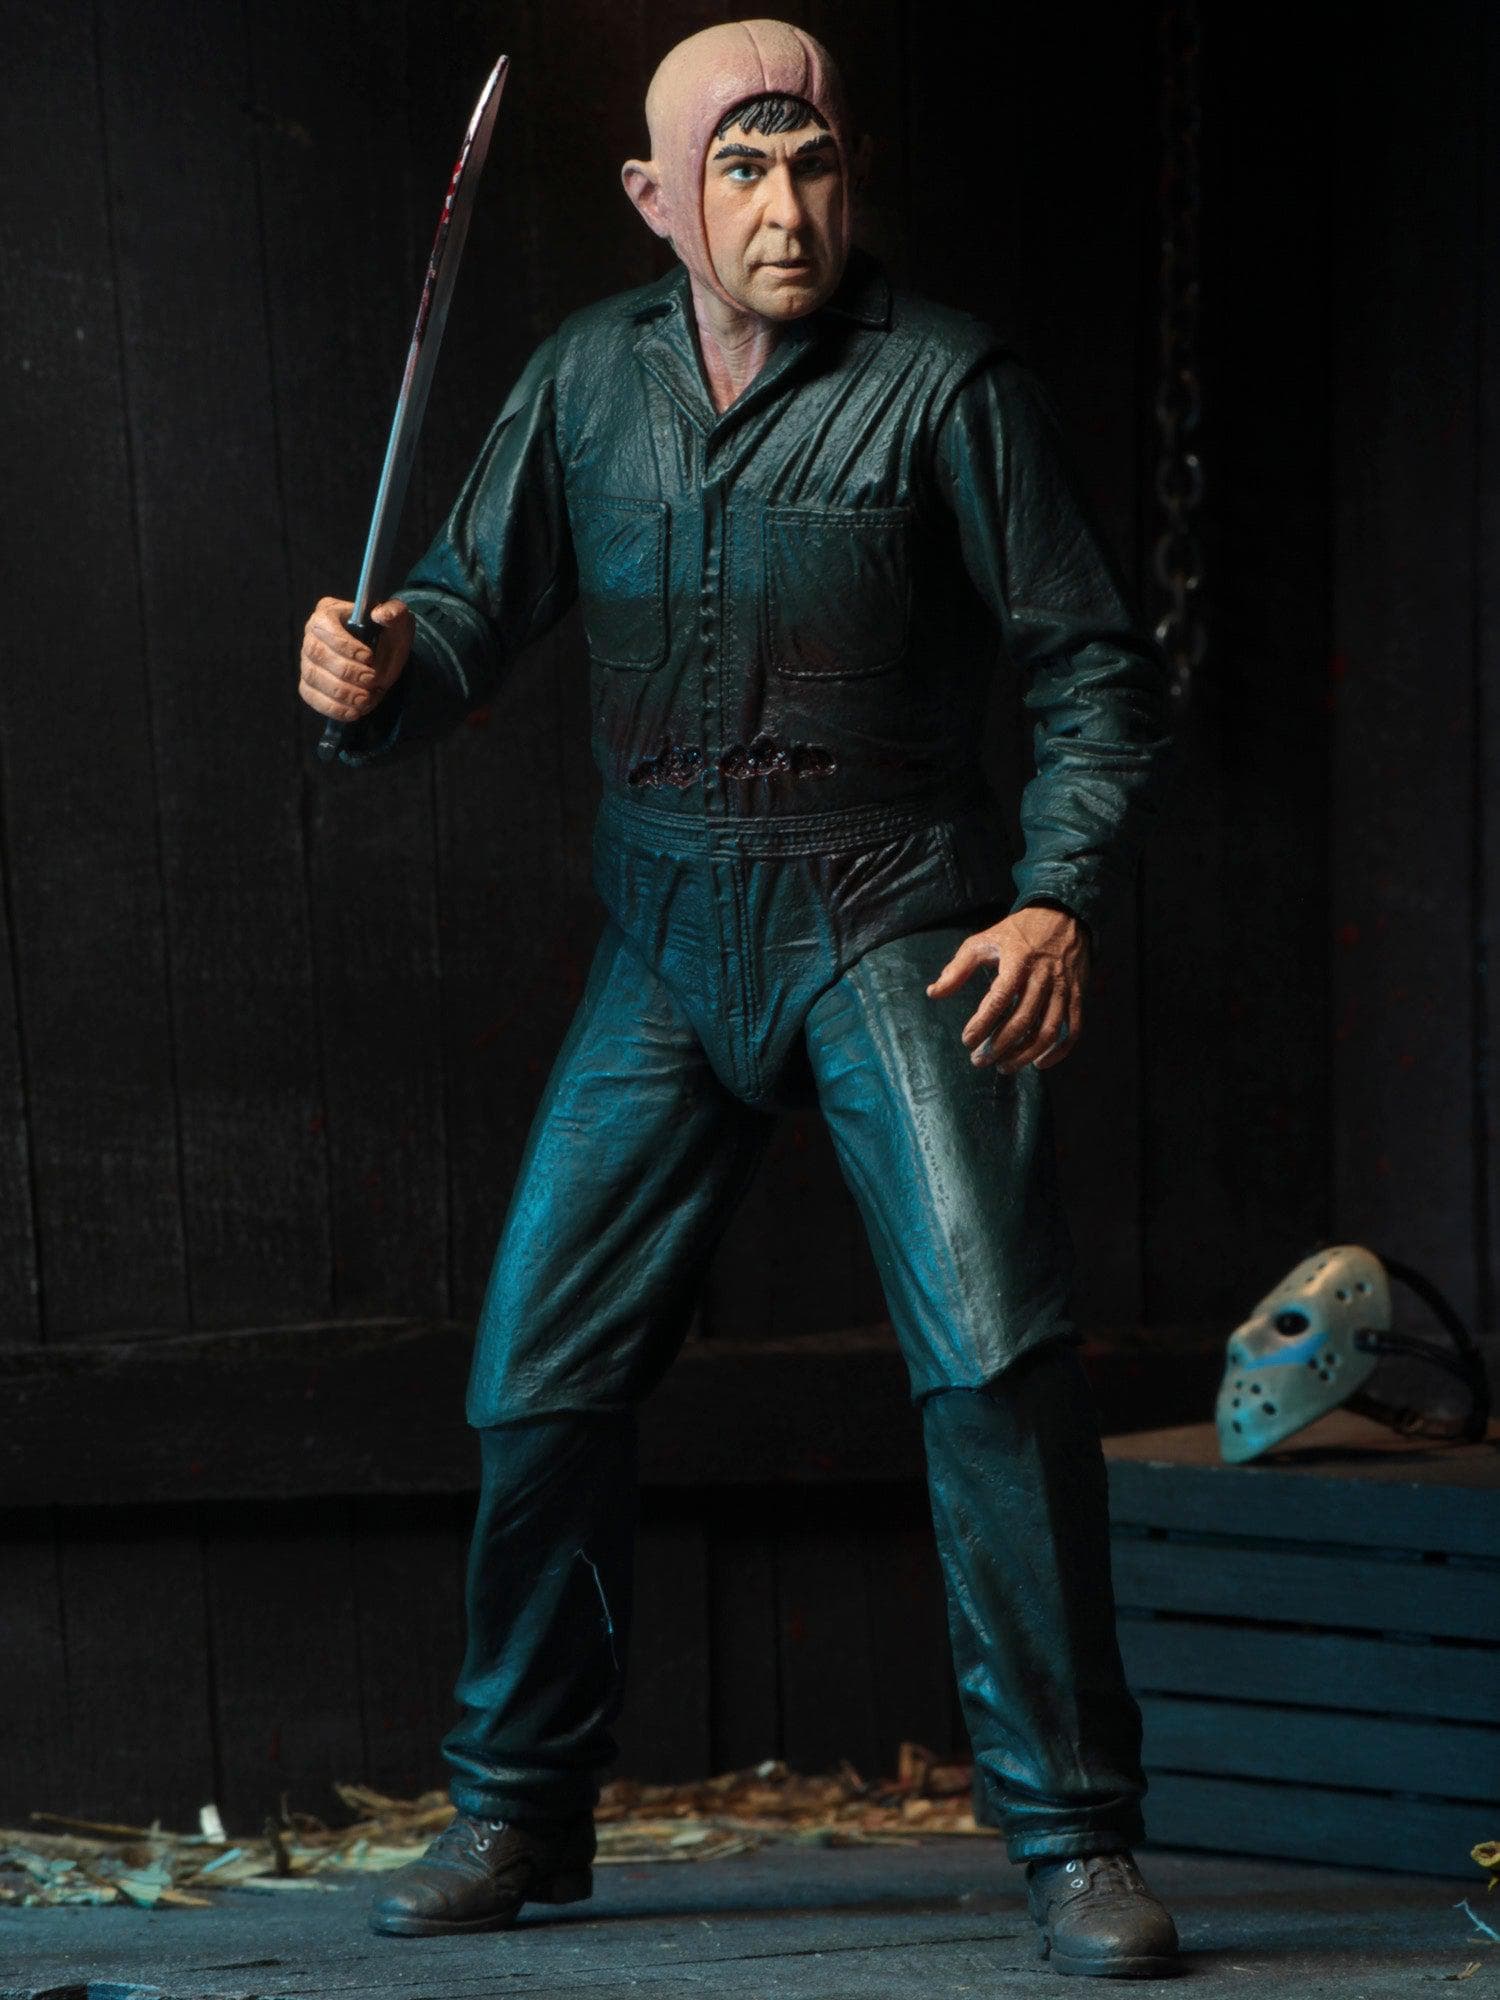 NECA - Friday the 13th - 7" Figure - Ultimate Part 5 Roy Burns - costumes.com